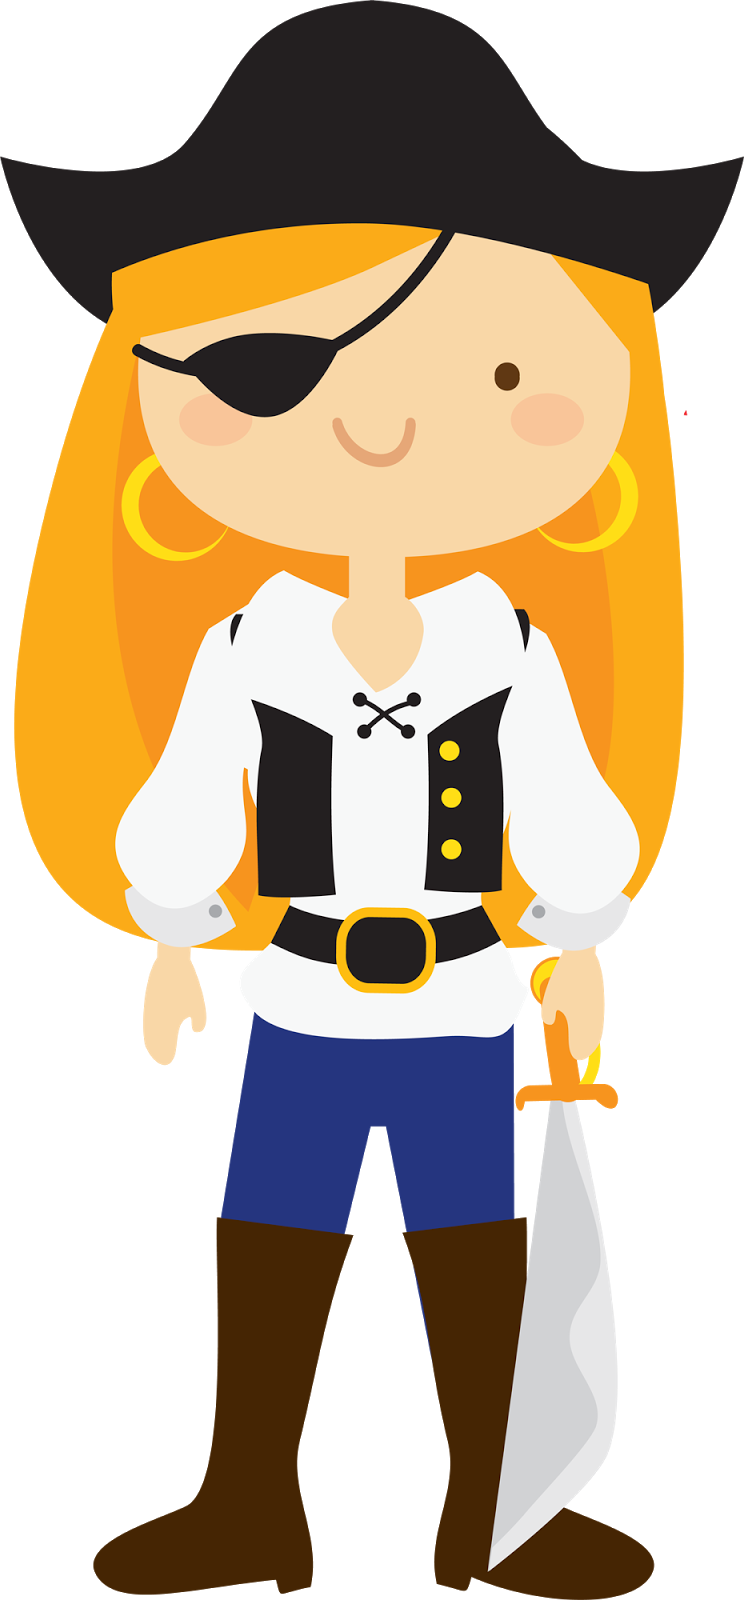 Labor Day Is Approaching, And The Pirate Queen Has - Pirate (744x1600)